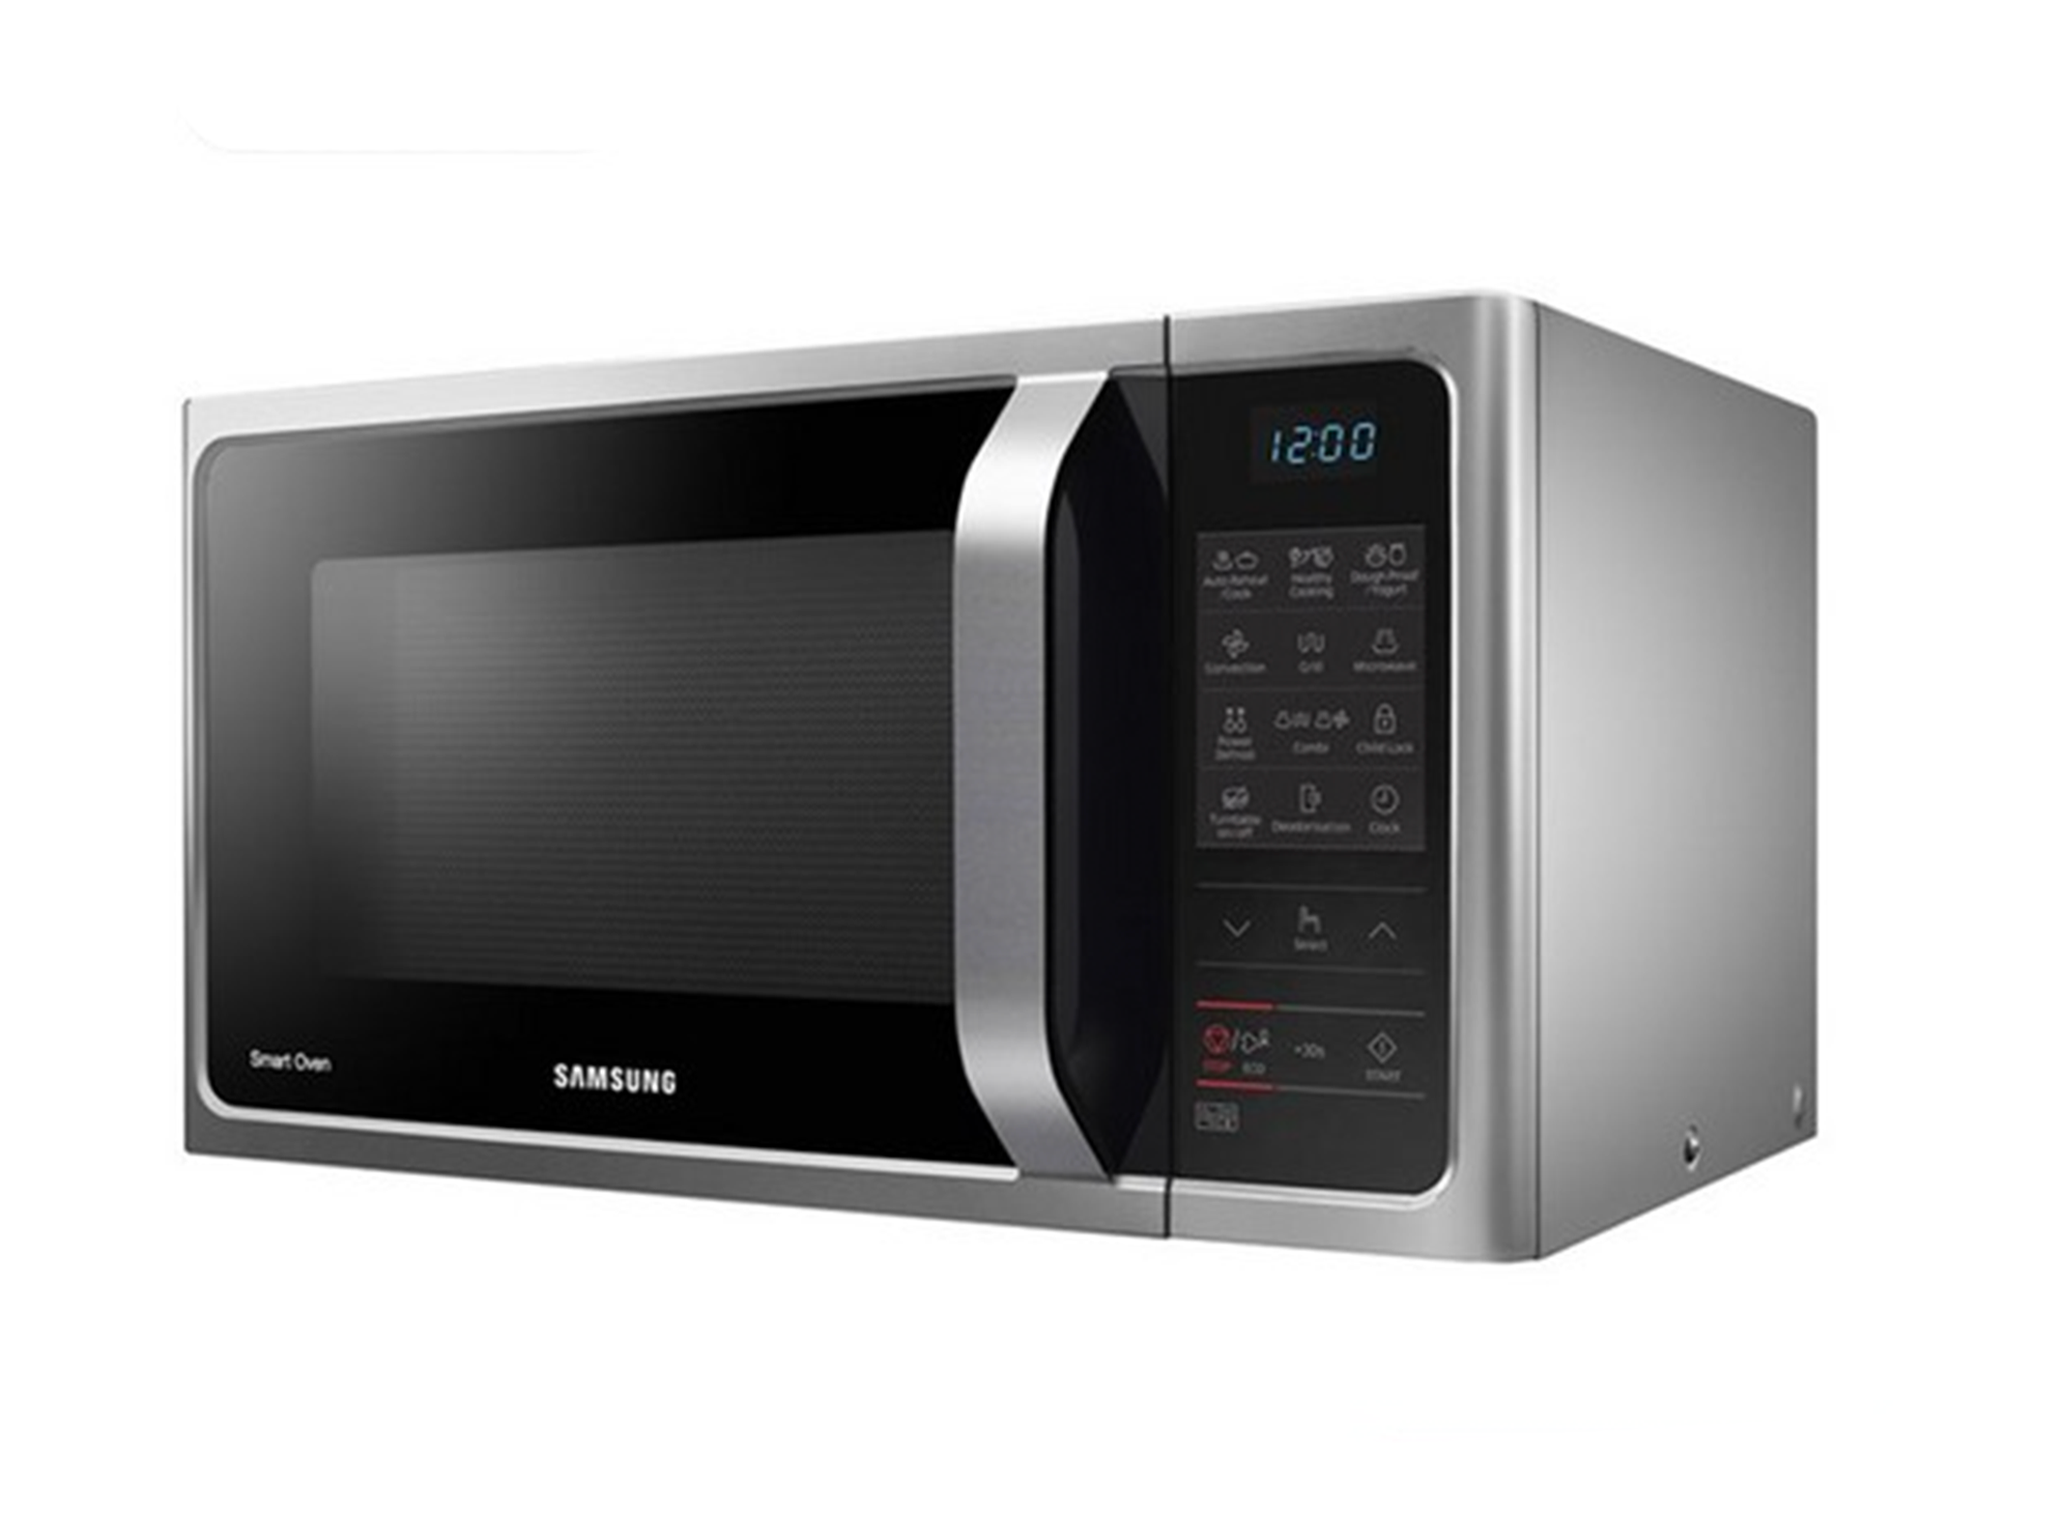 https://static.independent.co.uk/2024/01/02/17/Samsung%20MC28H5013ASEU%2028l%20convection%20microwave%20oven.png